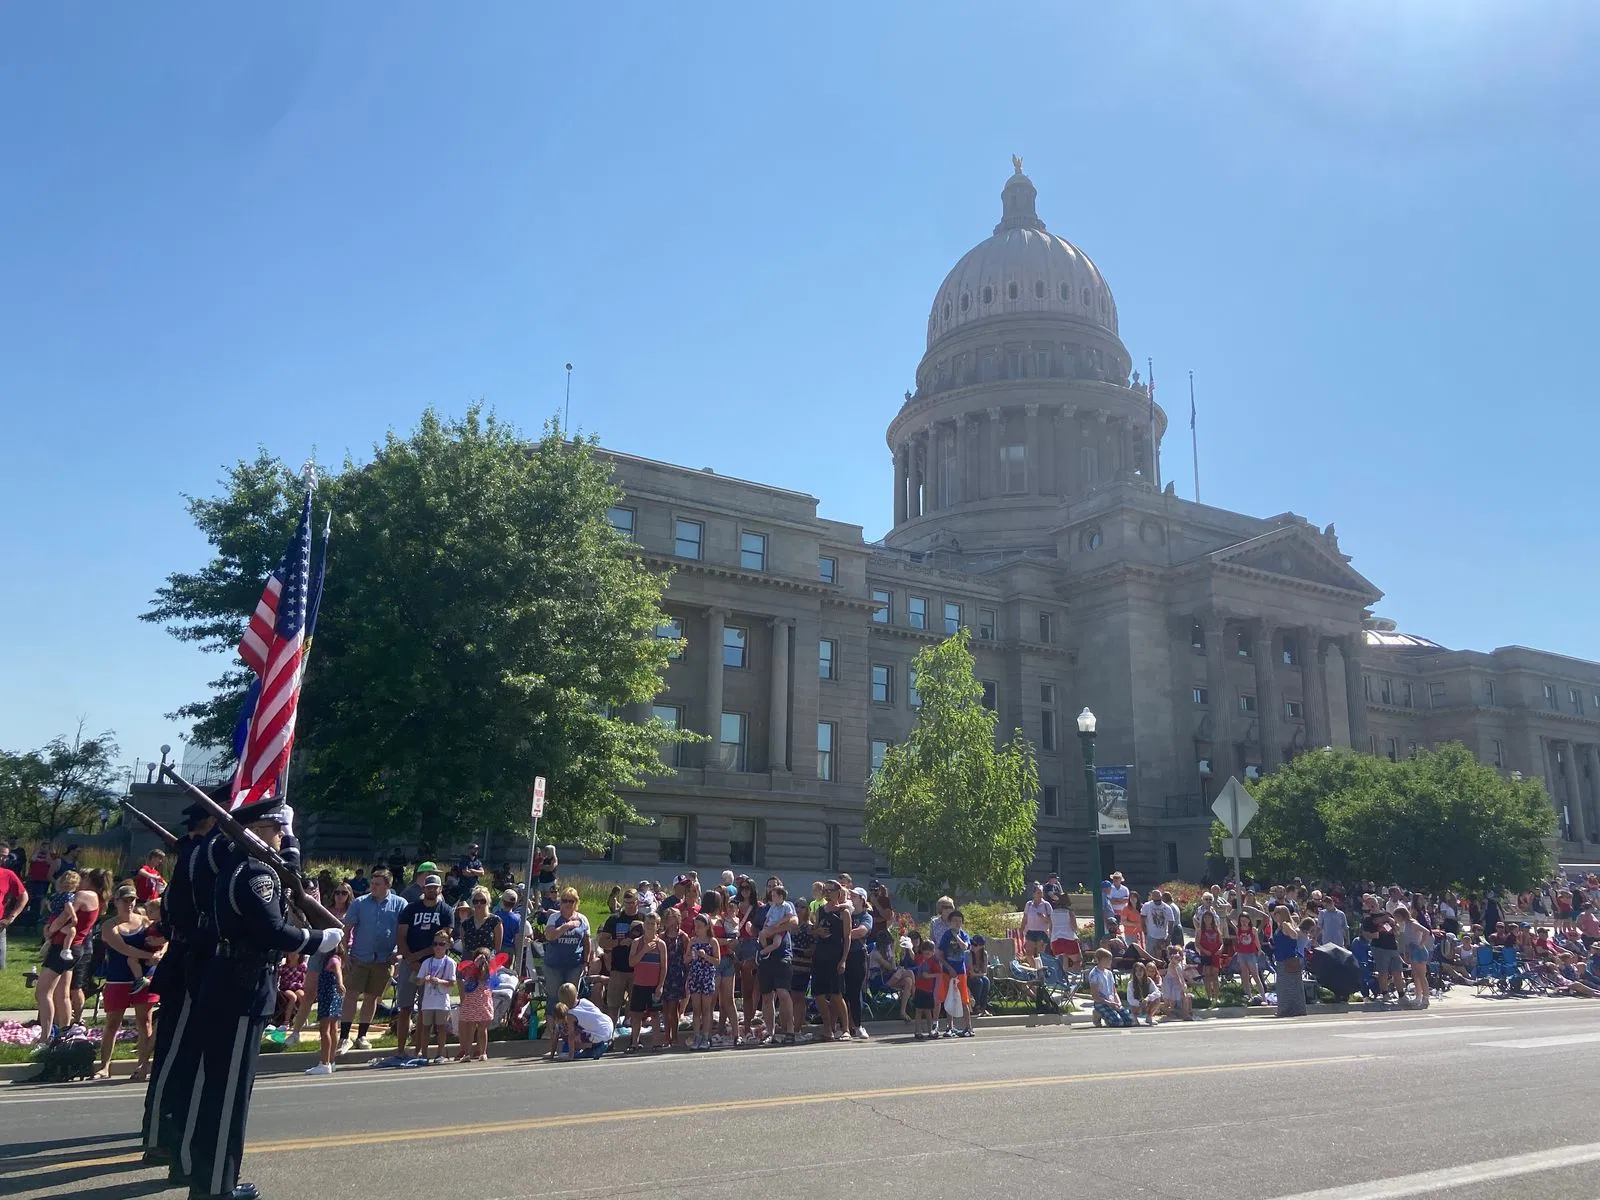 Crowd of people watching the honor guard in the Boise 4th of July Independence Day Parade in front of the Boise capitol building.